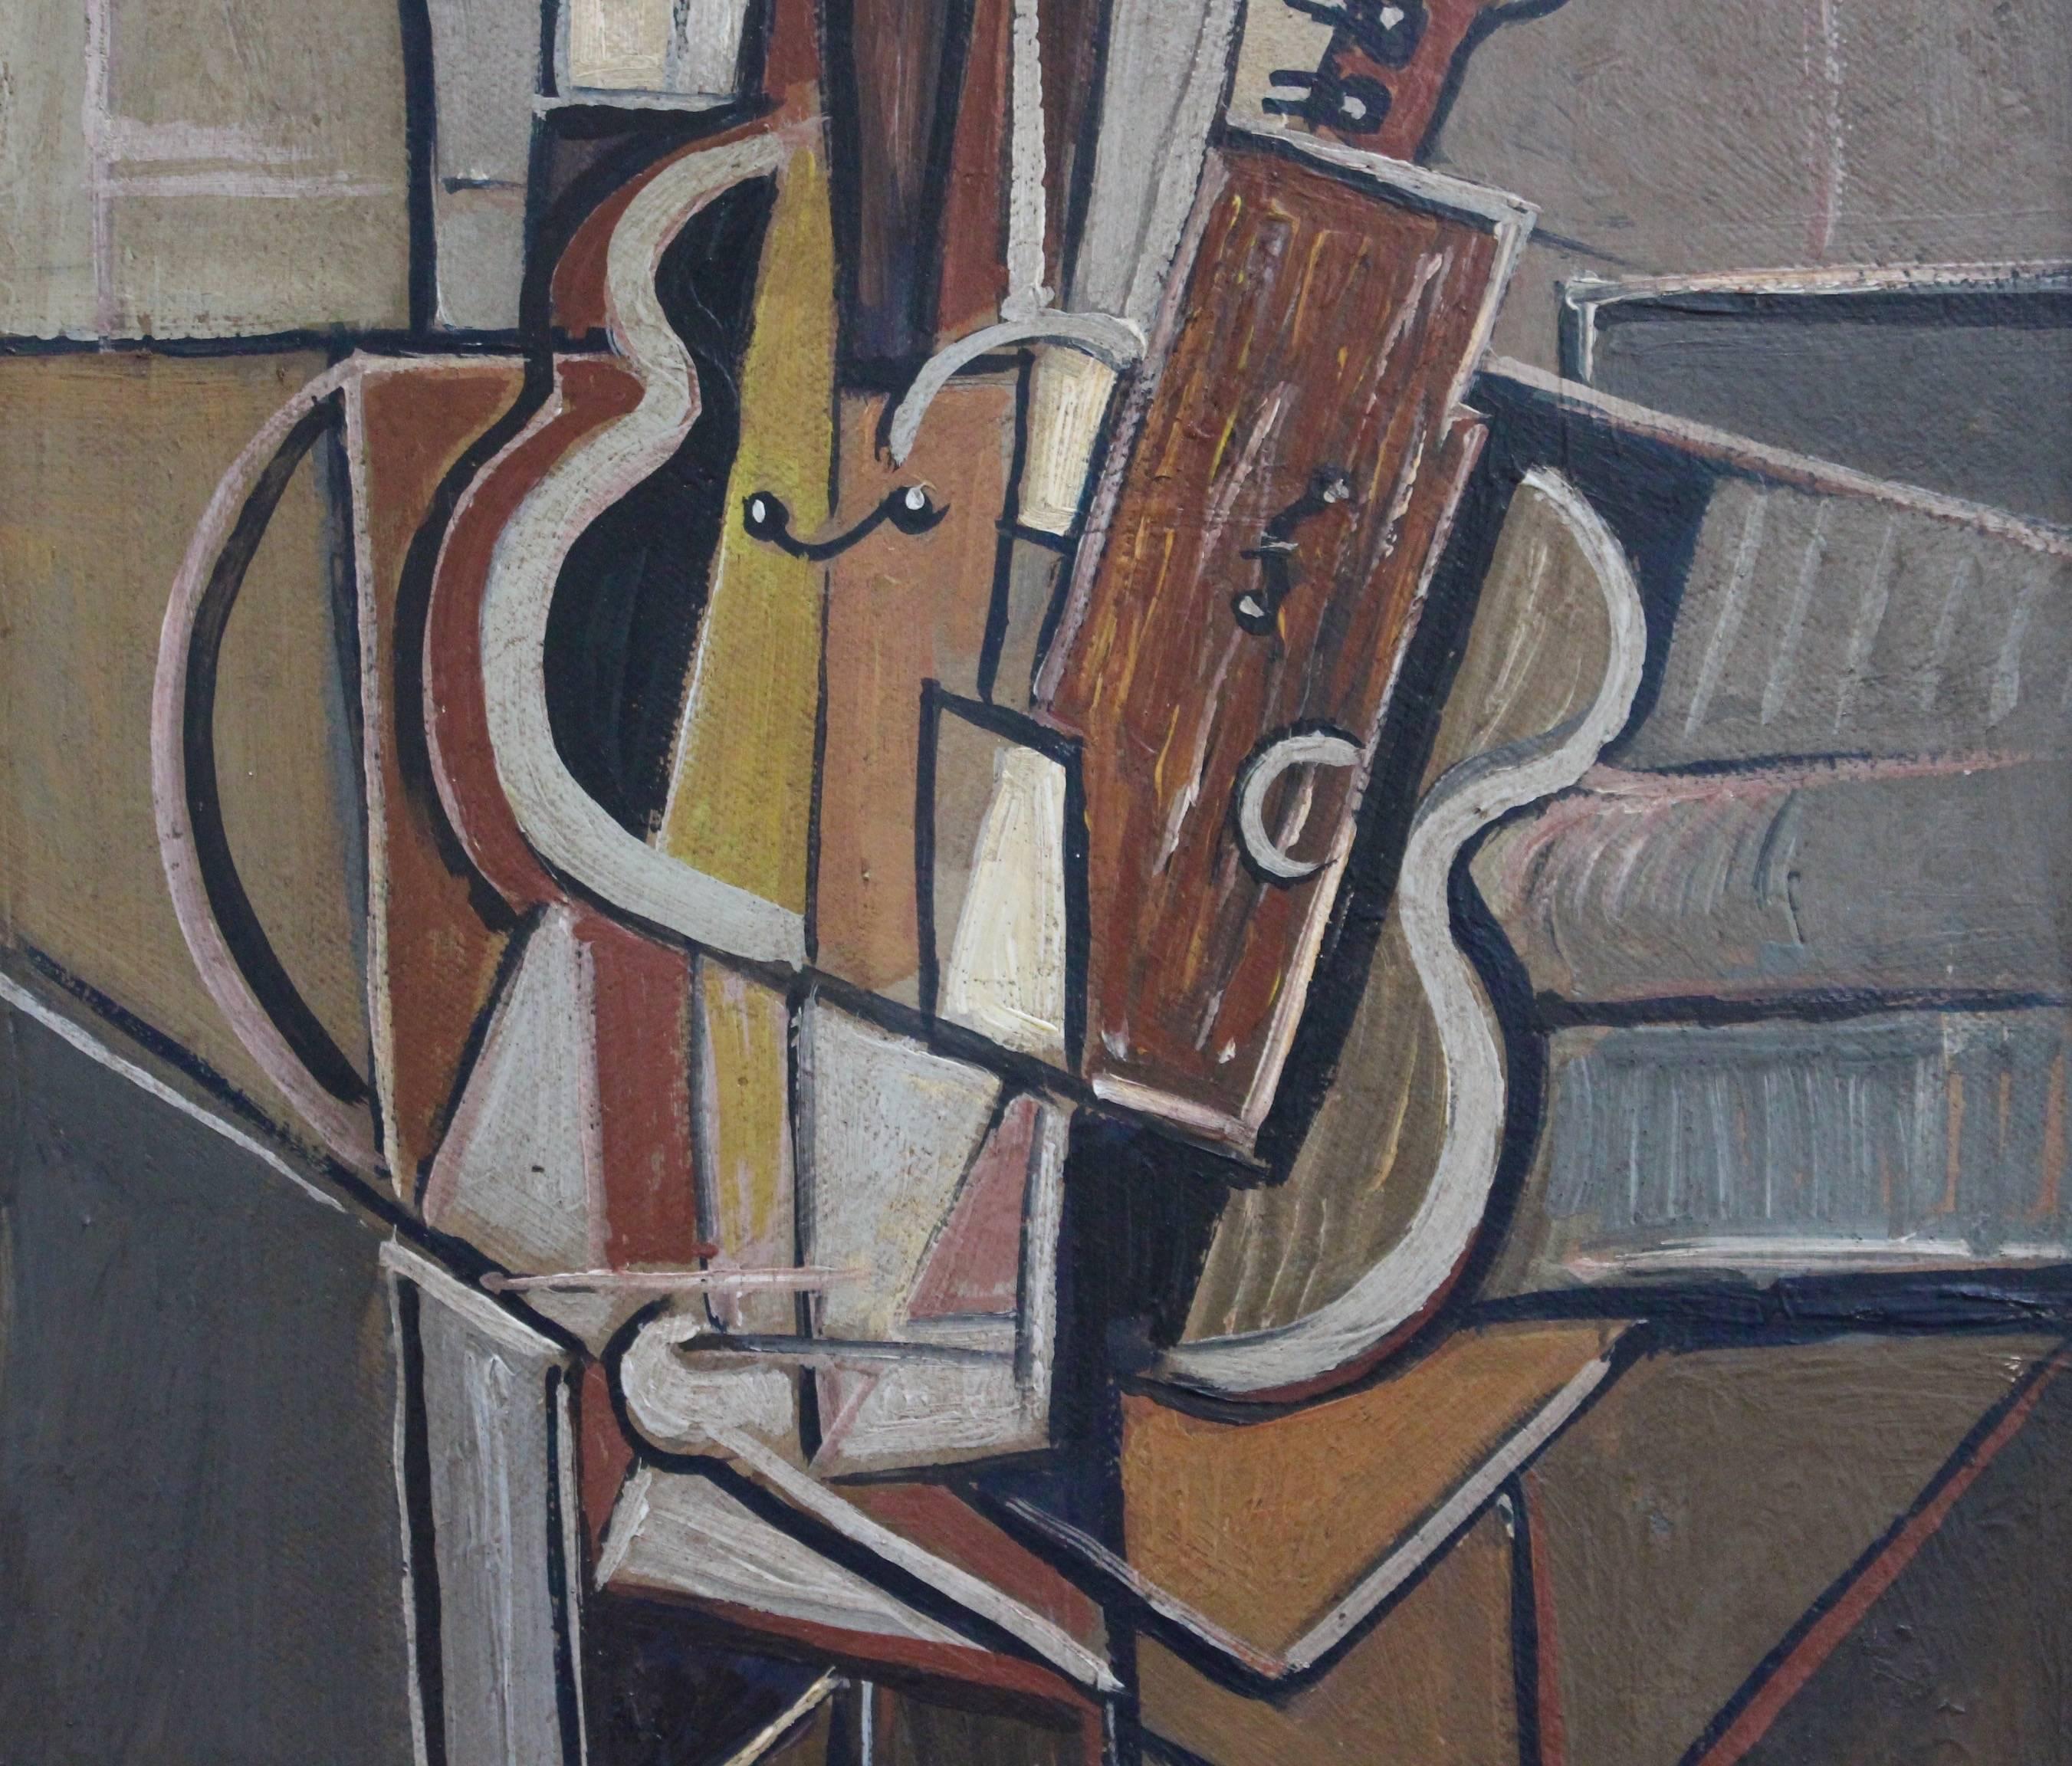 'Musical Strings', oil on board (circa 1940s - 1950s), by artist with the initials J.G. A sublime cubist representation of stringed instruments. The earth-tone hues - brown, beige, terracotta and a touch of green-grey all combine in angular forms